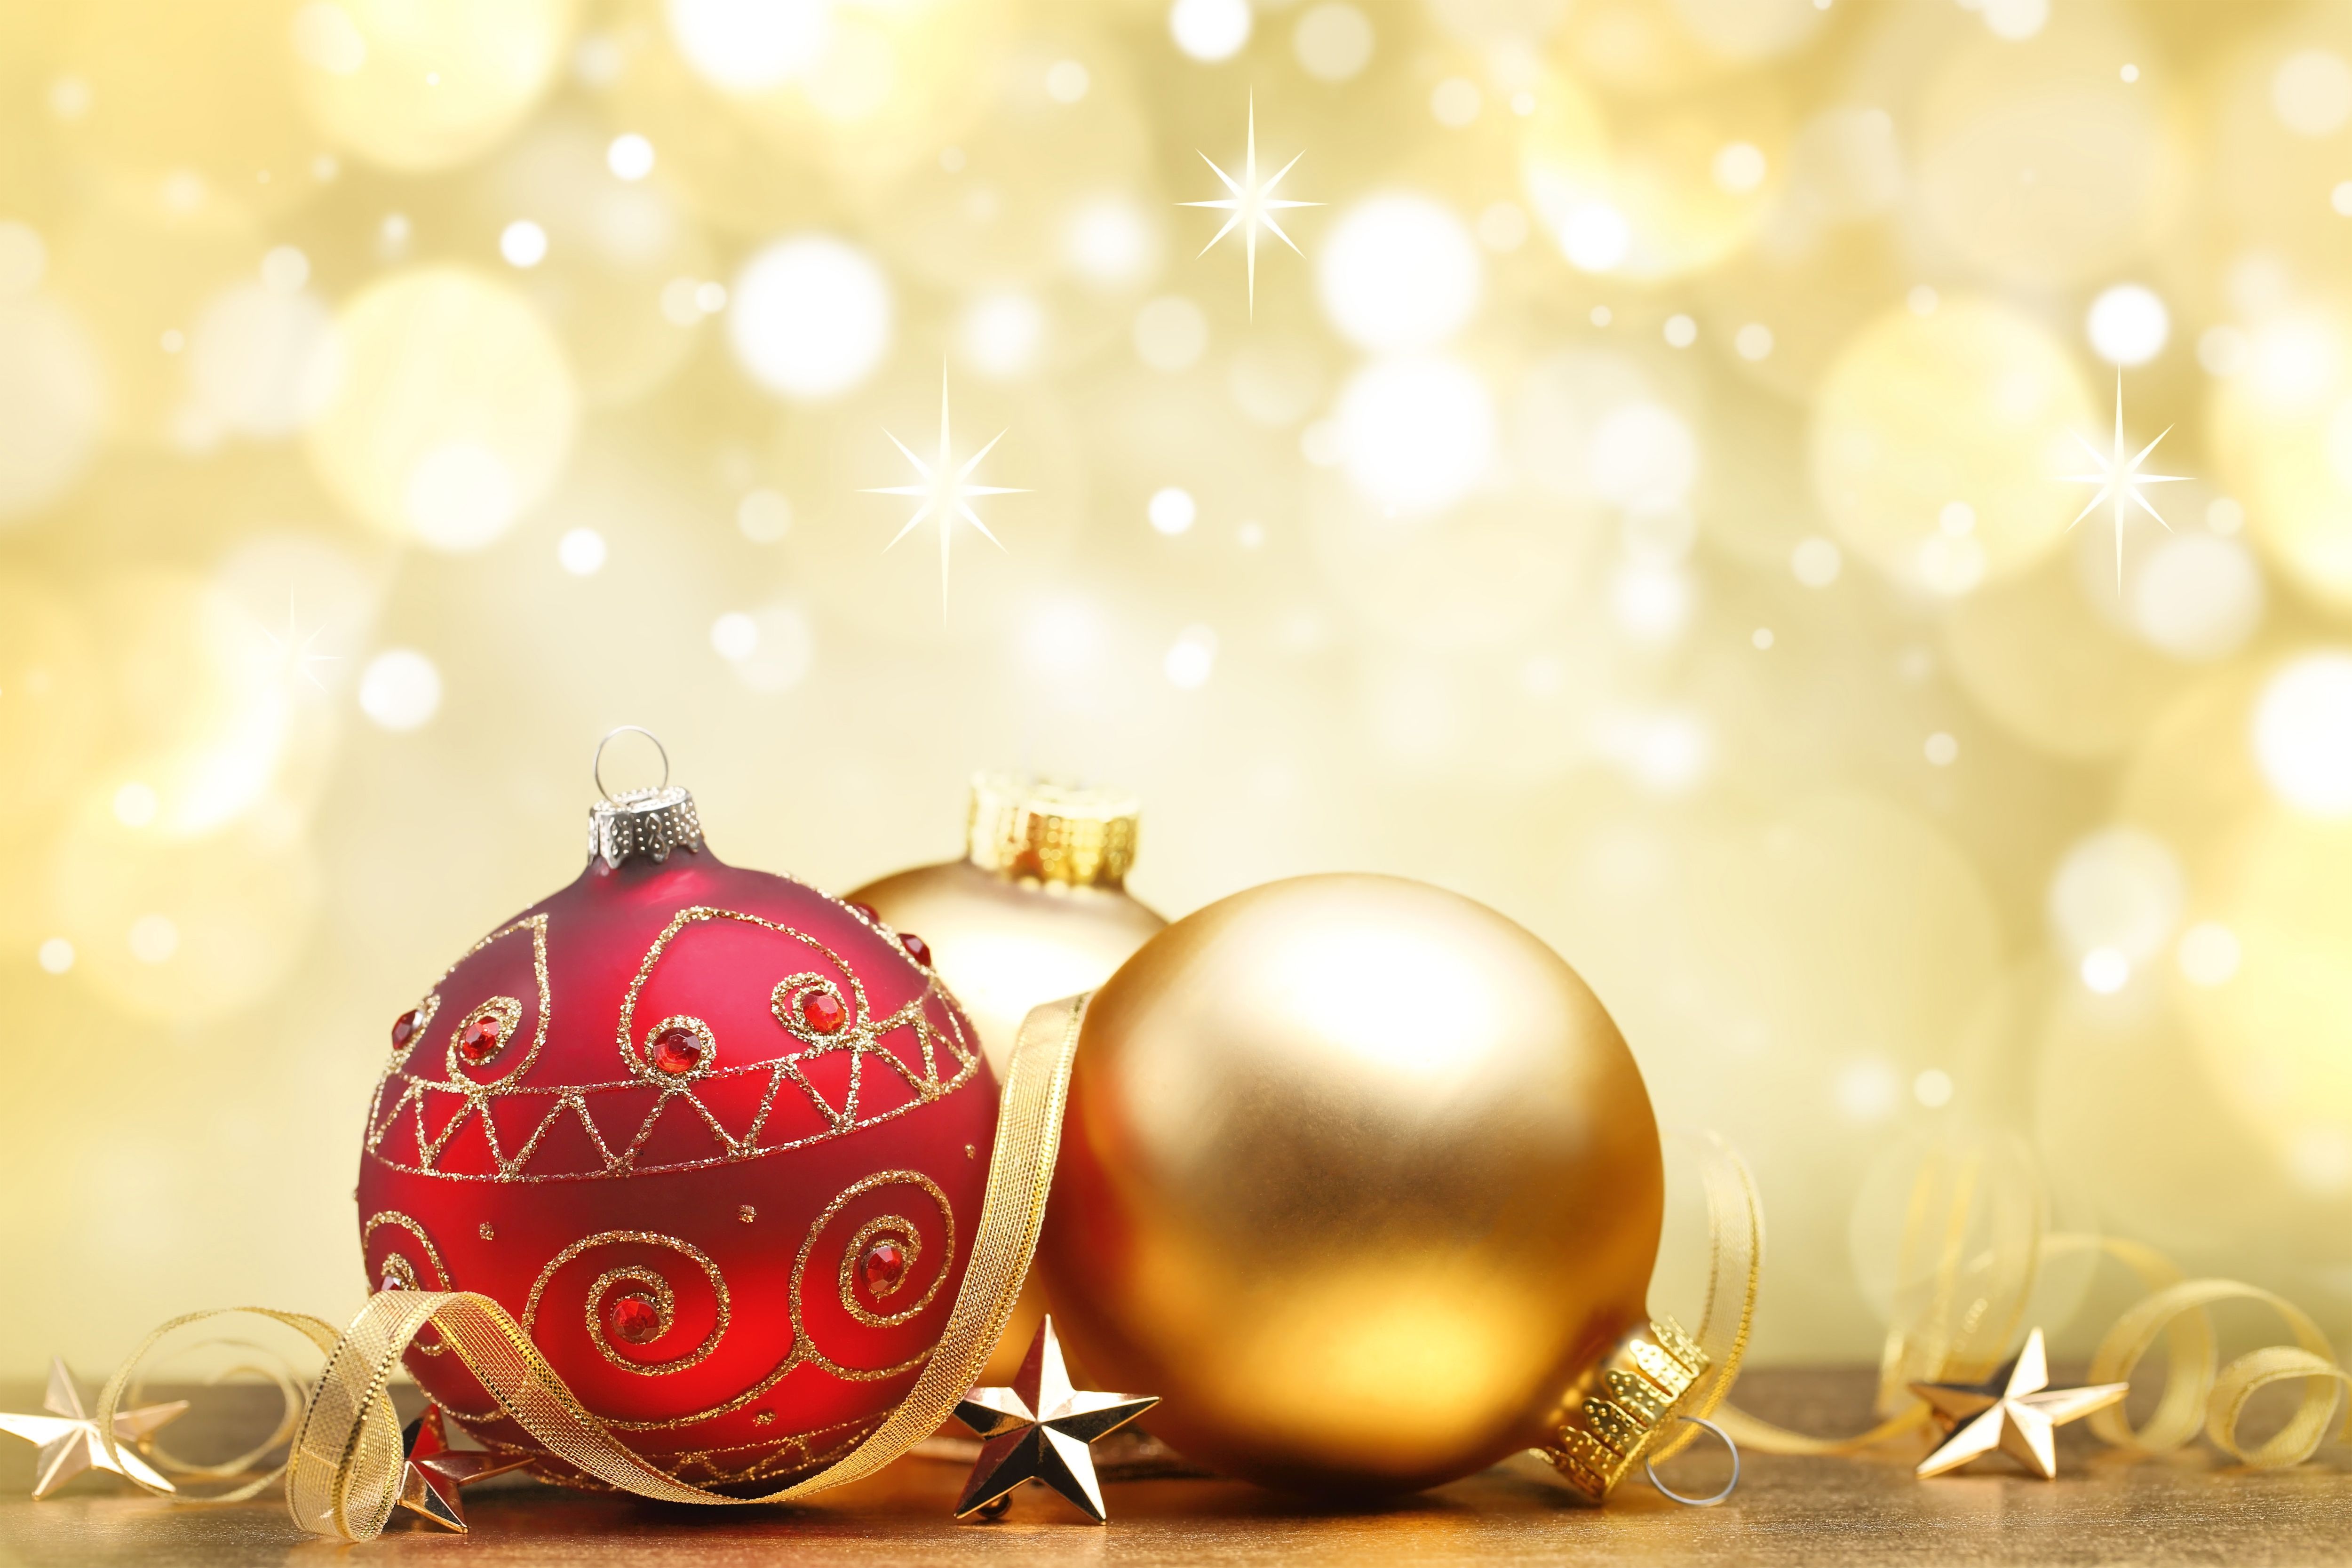 Christmas Background With Red And Gold Ornaments Quality Image And Transparent PNG Free Clipart